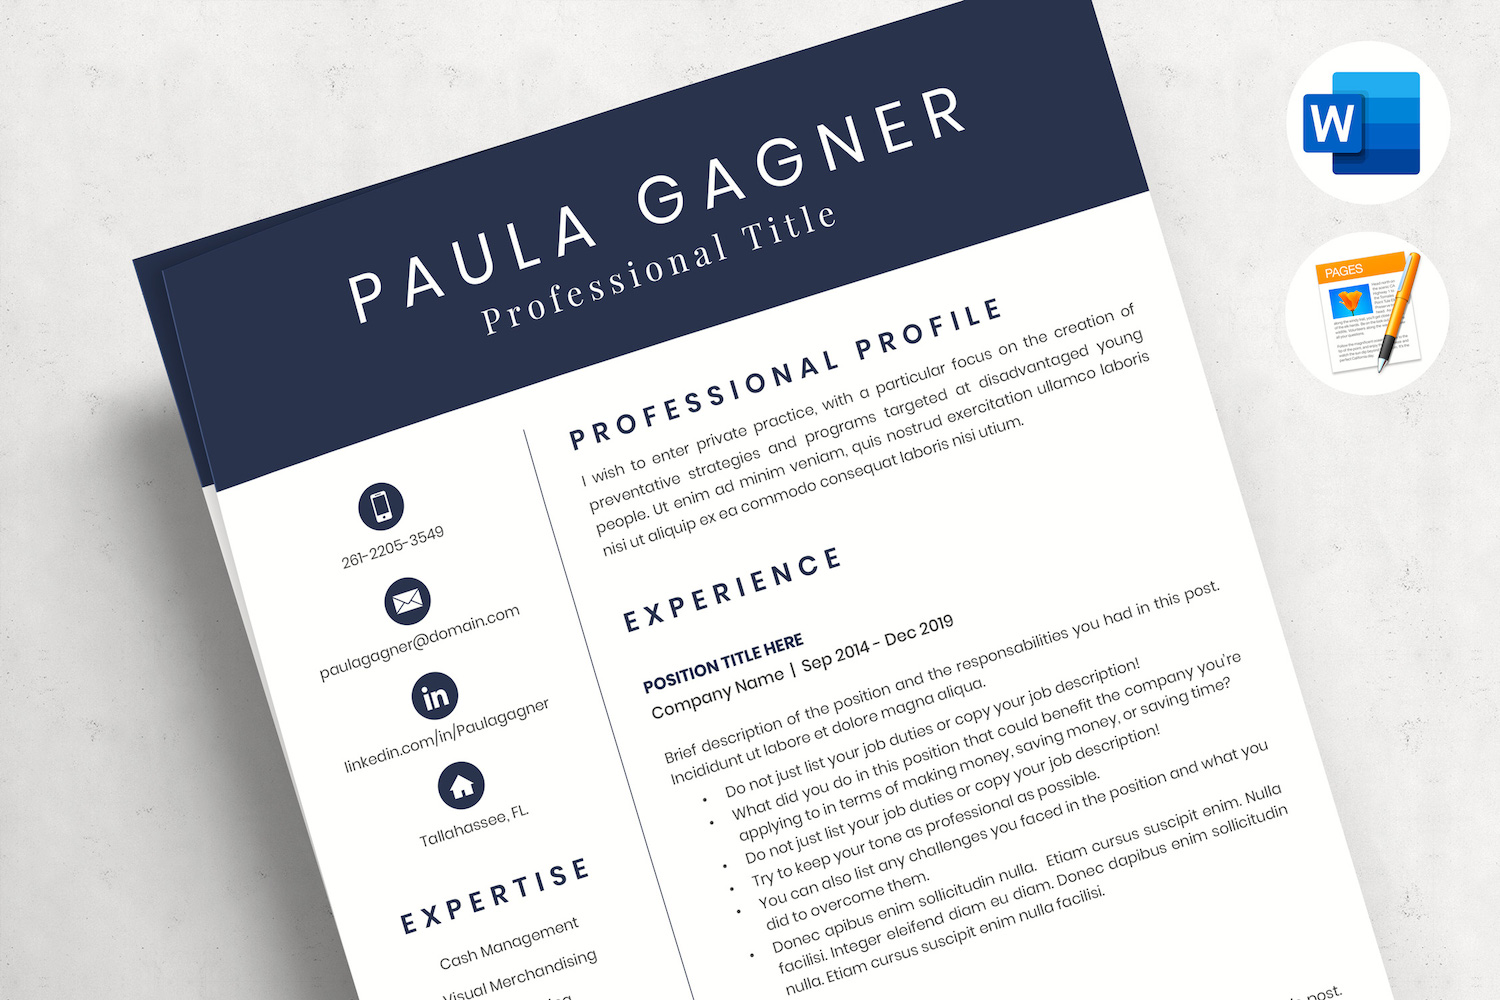 PAULA - Modern and Professional Resume Layout, Cover Letter and References page